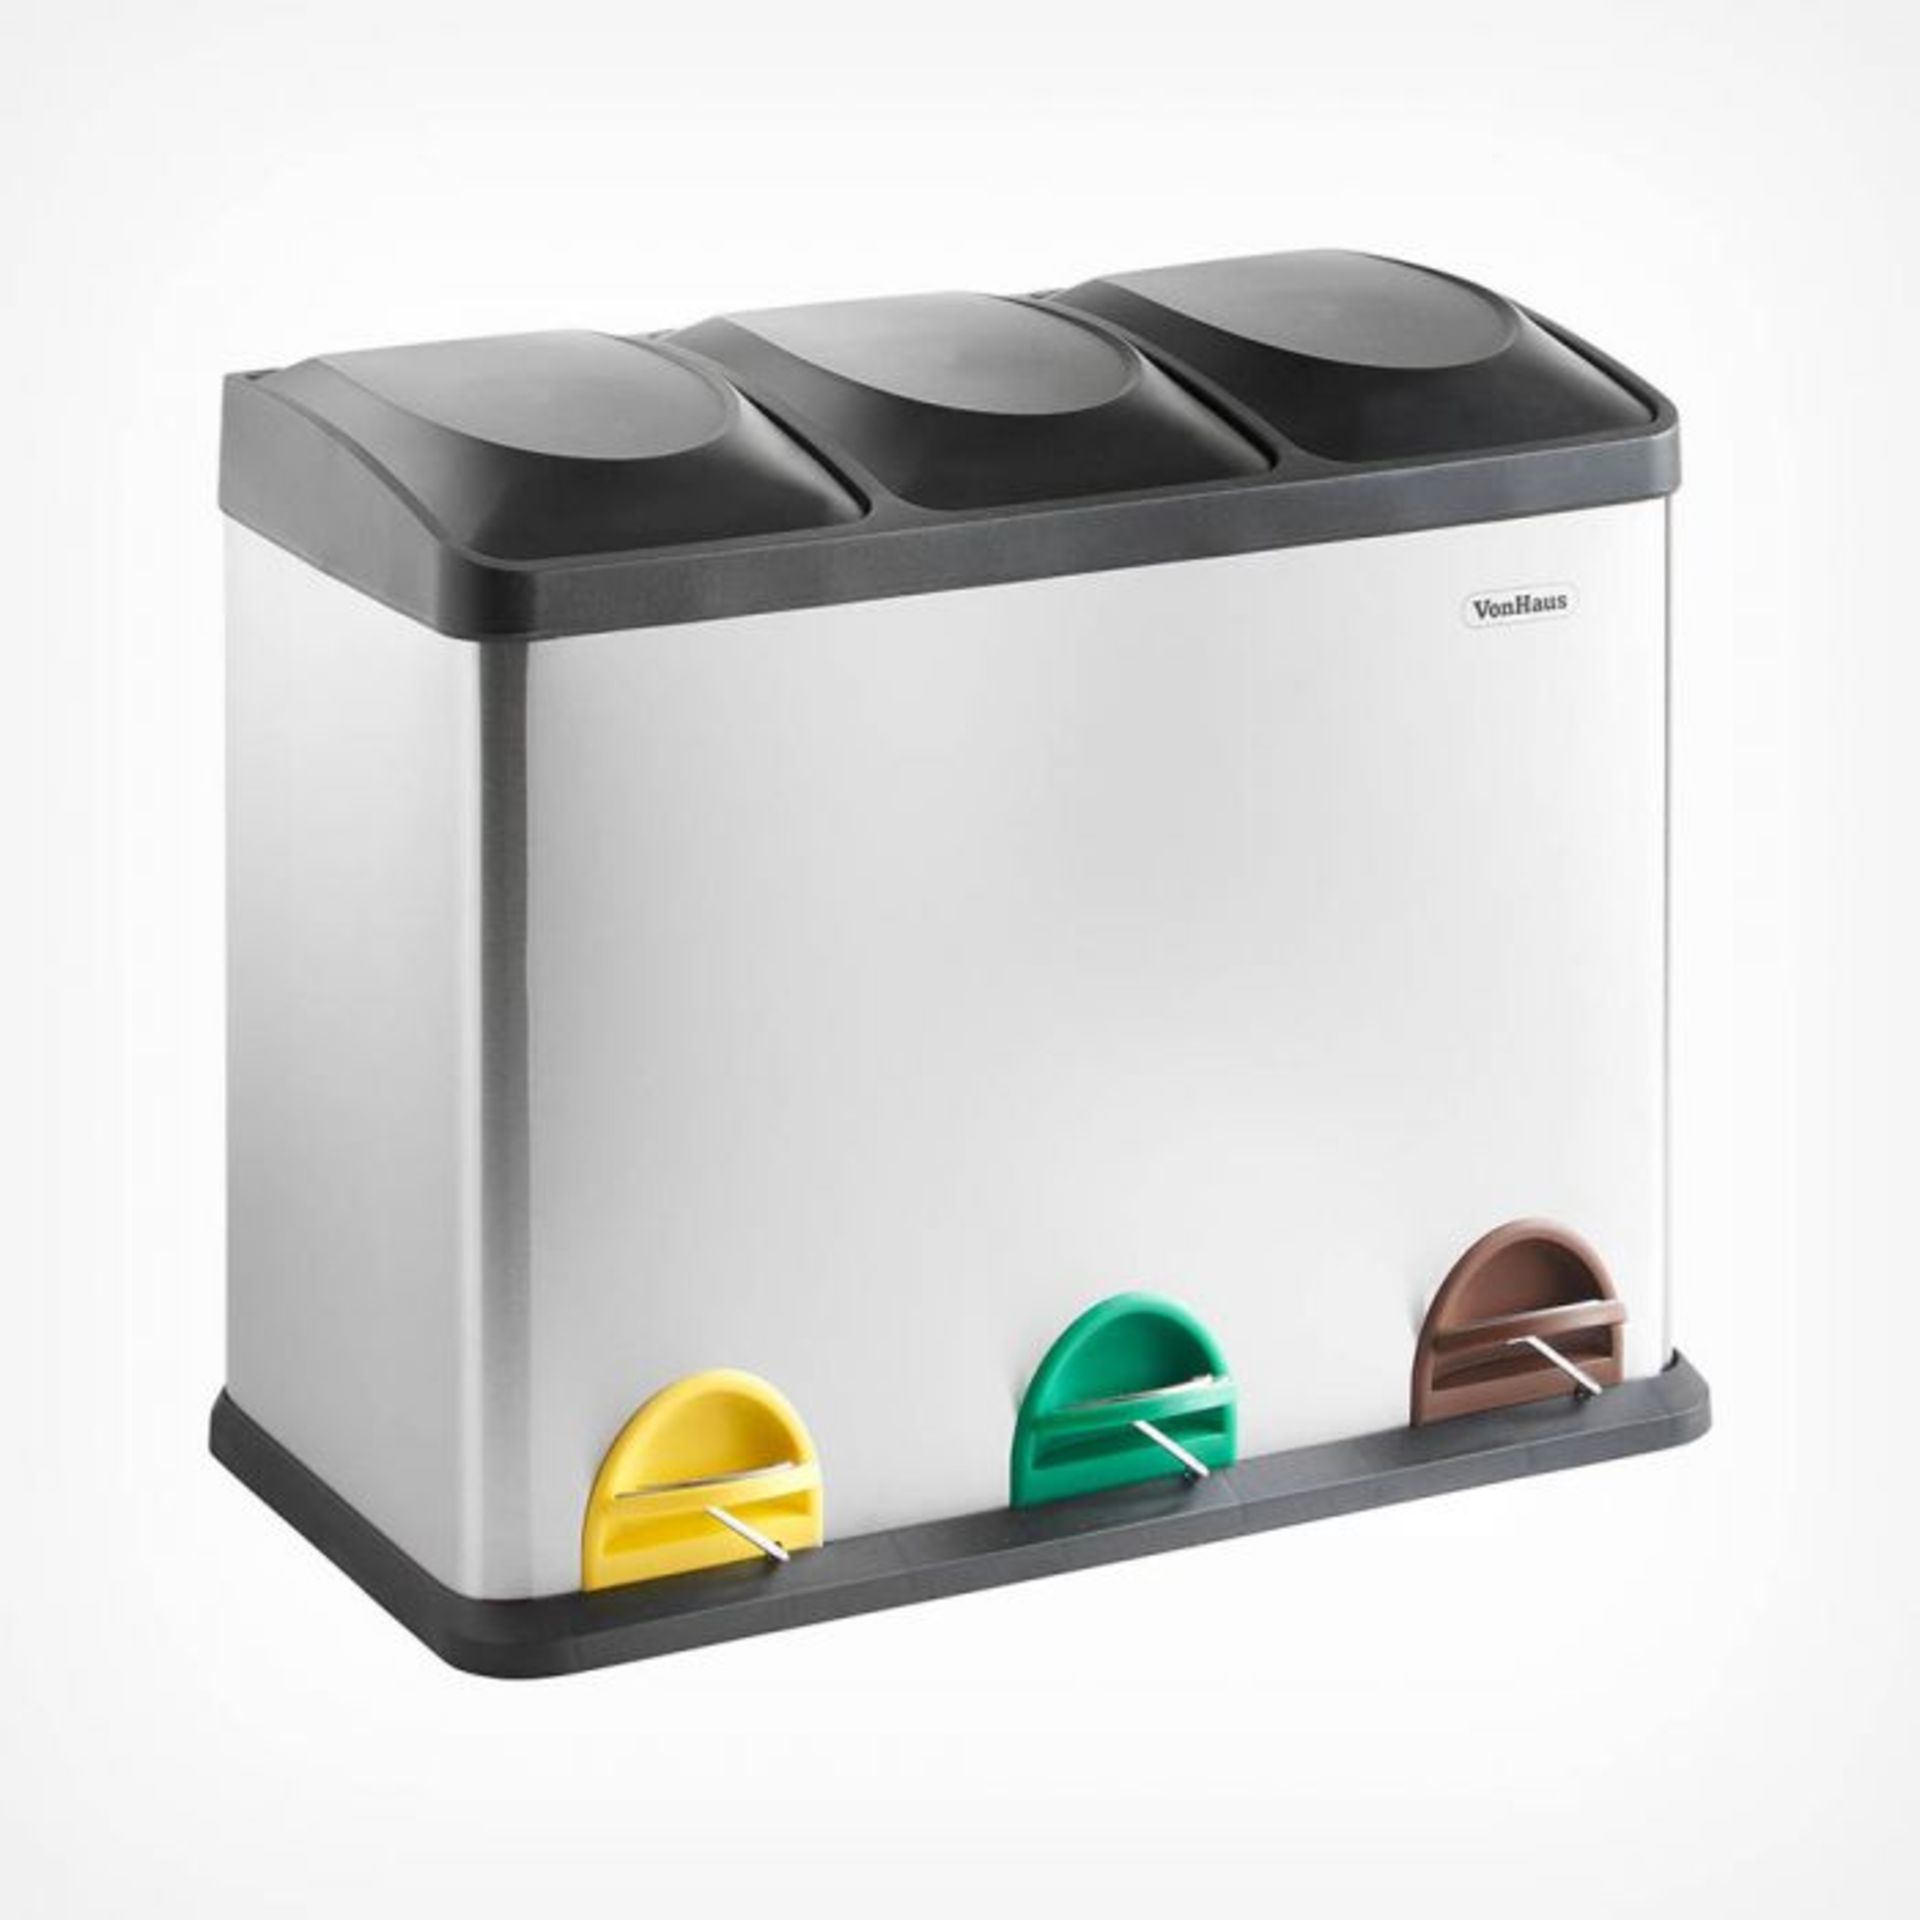 (S66) 45L Pedal Recycling Bin Keep on top of your recycling and keep your home looking stylish... - Image 2 of 4